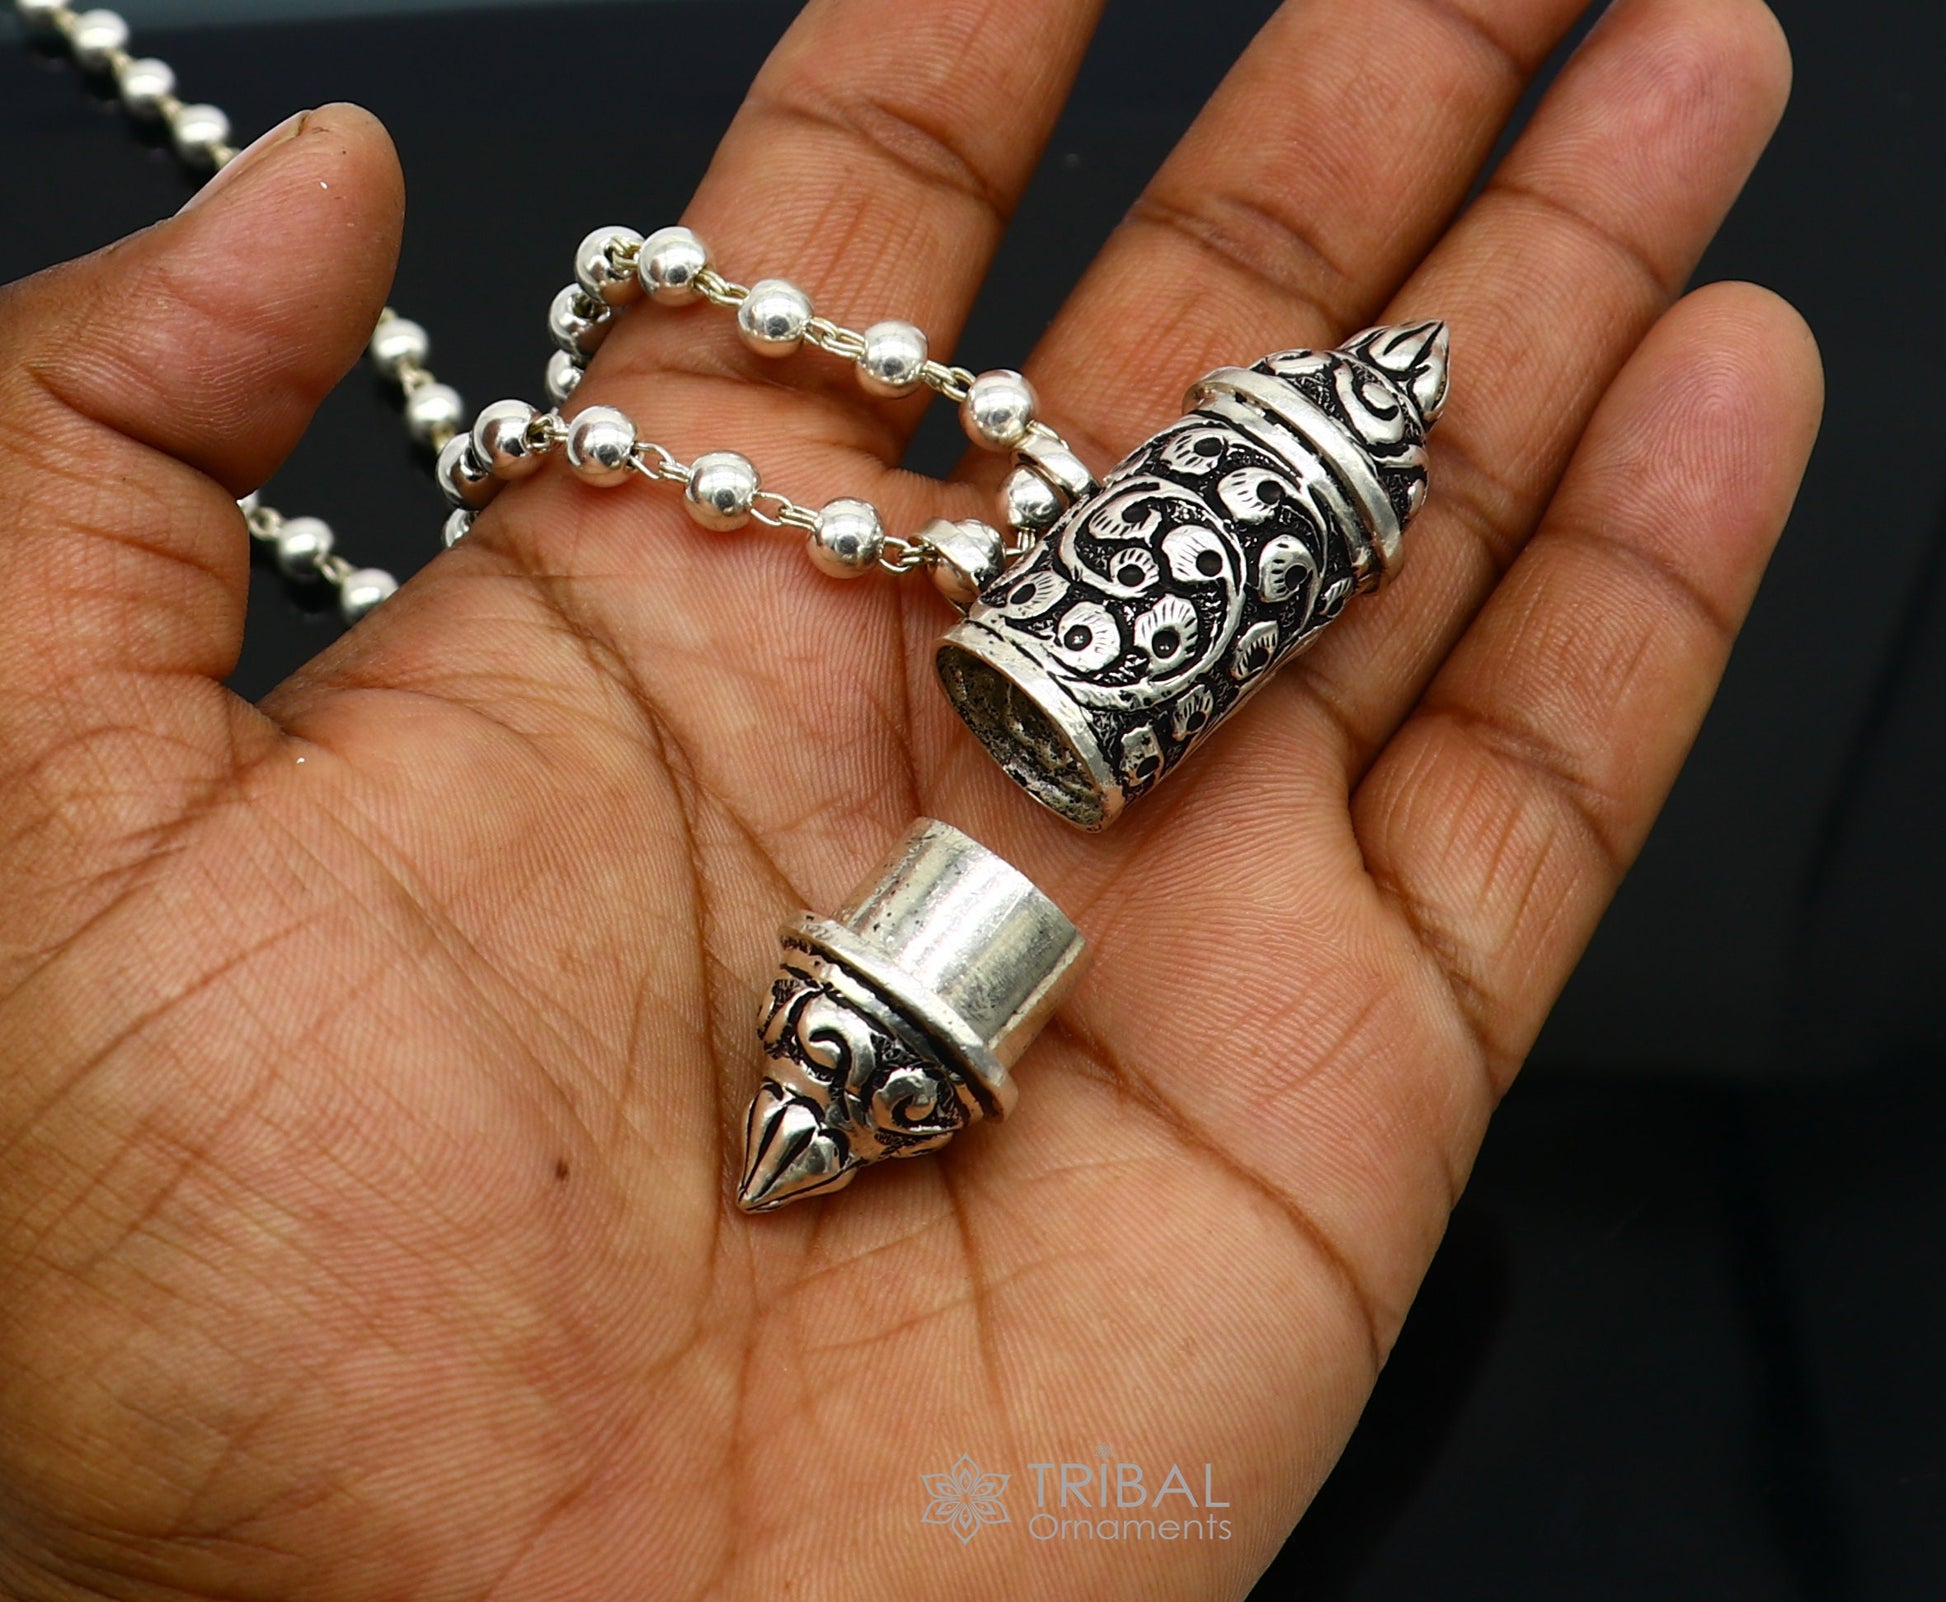 925 Sterling silver handmade Nakshai design pendant amulet mantra box pendant with beaded necklace tribal ethnic cultural jewelry set604 - TRIBAL ORNAMENTS